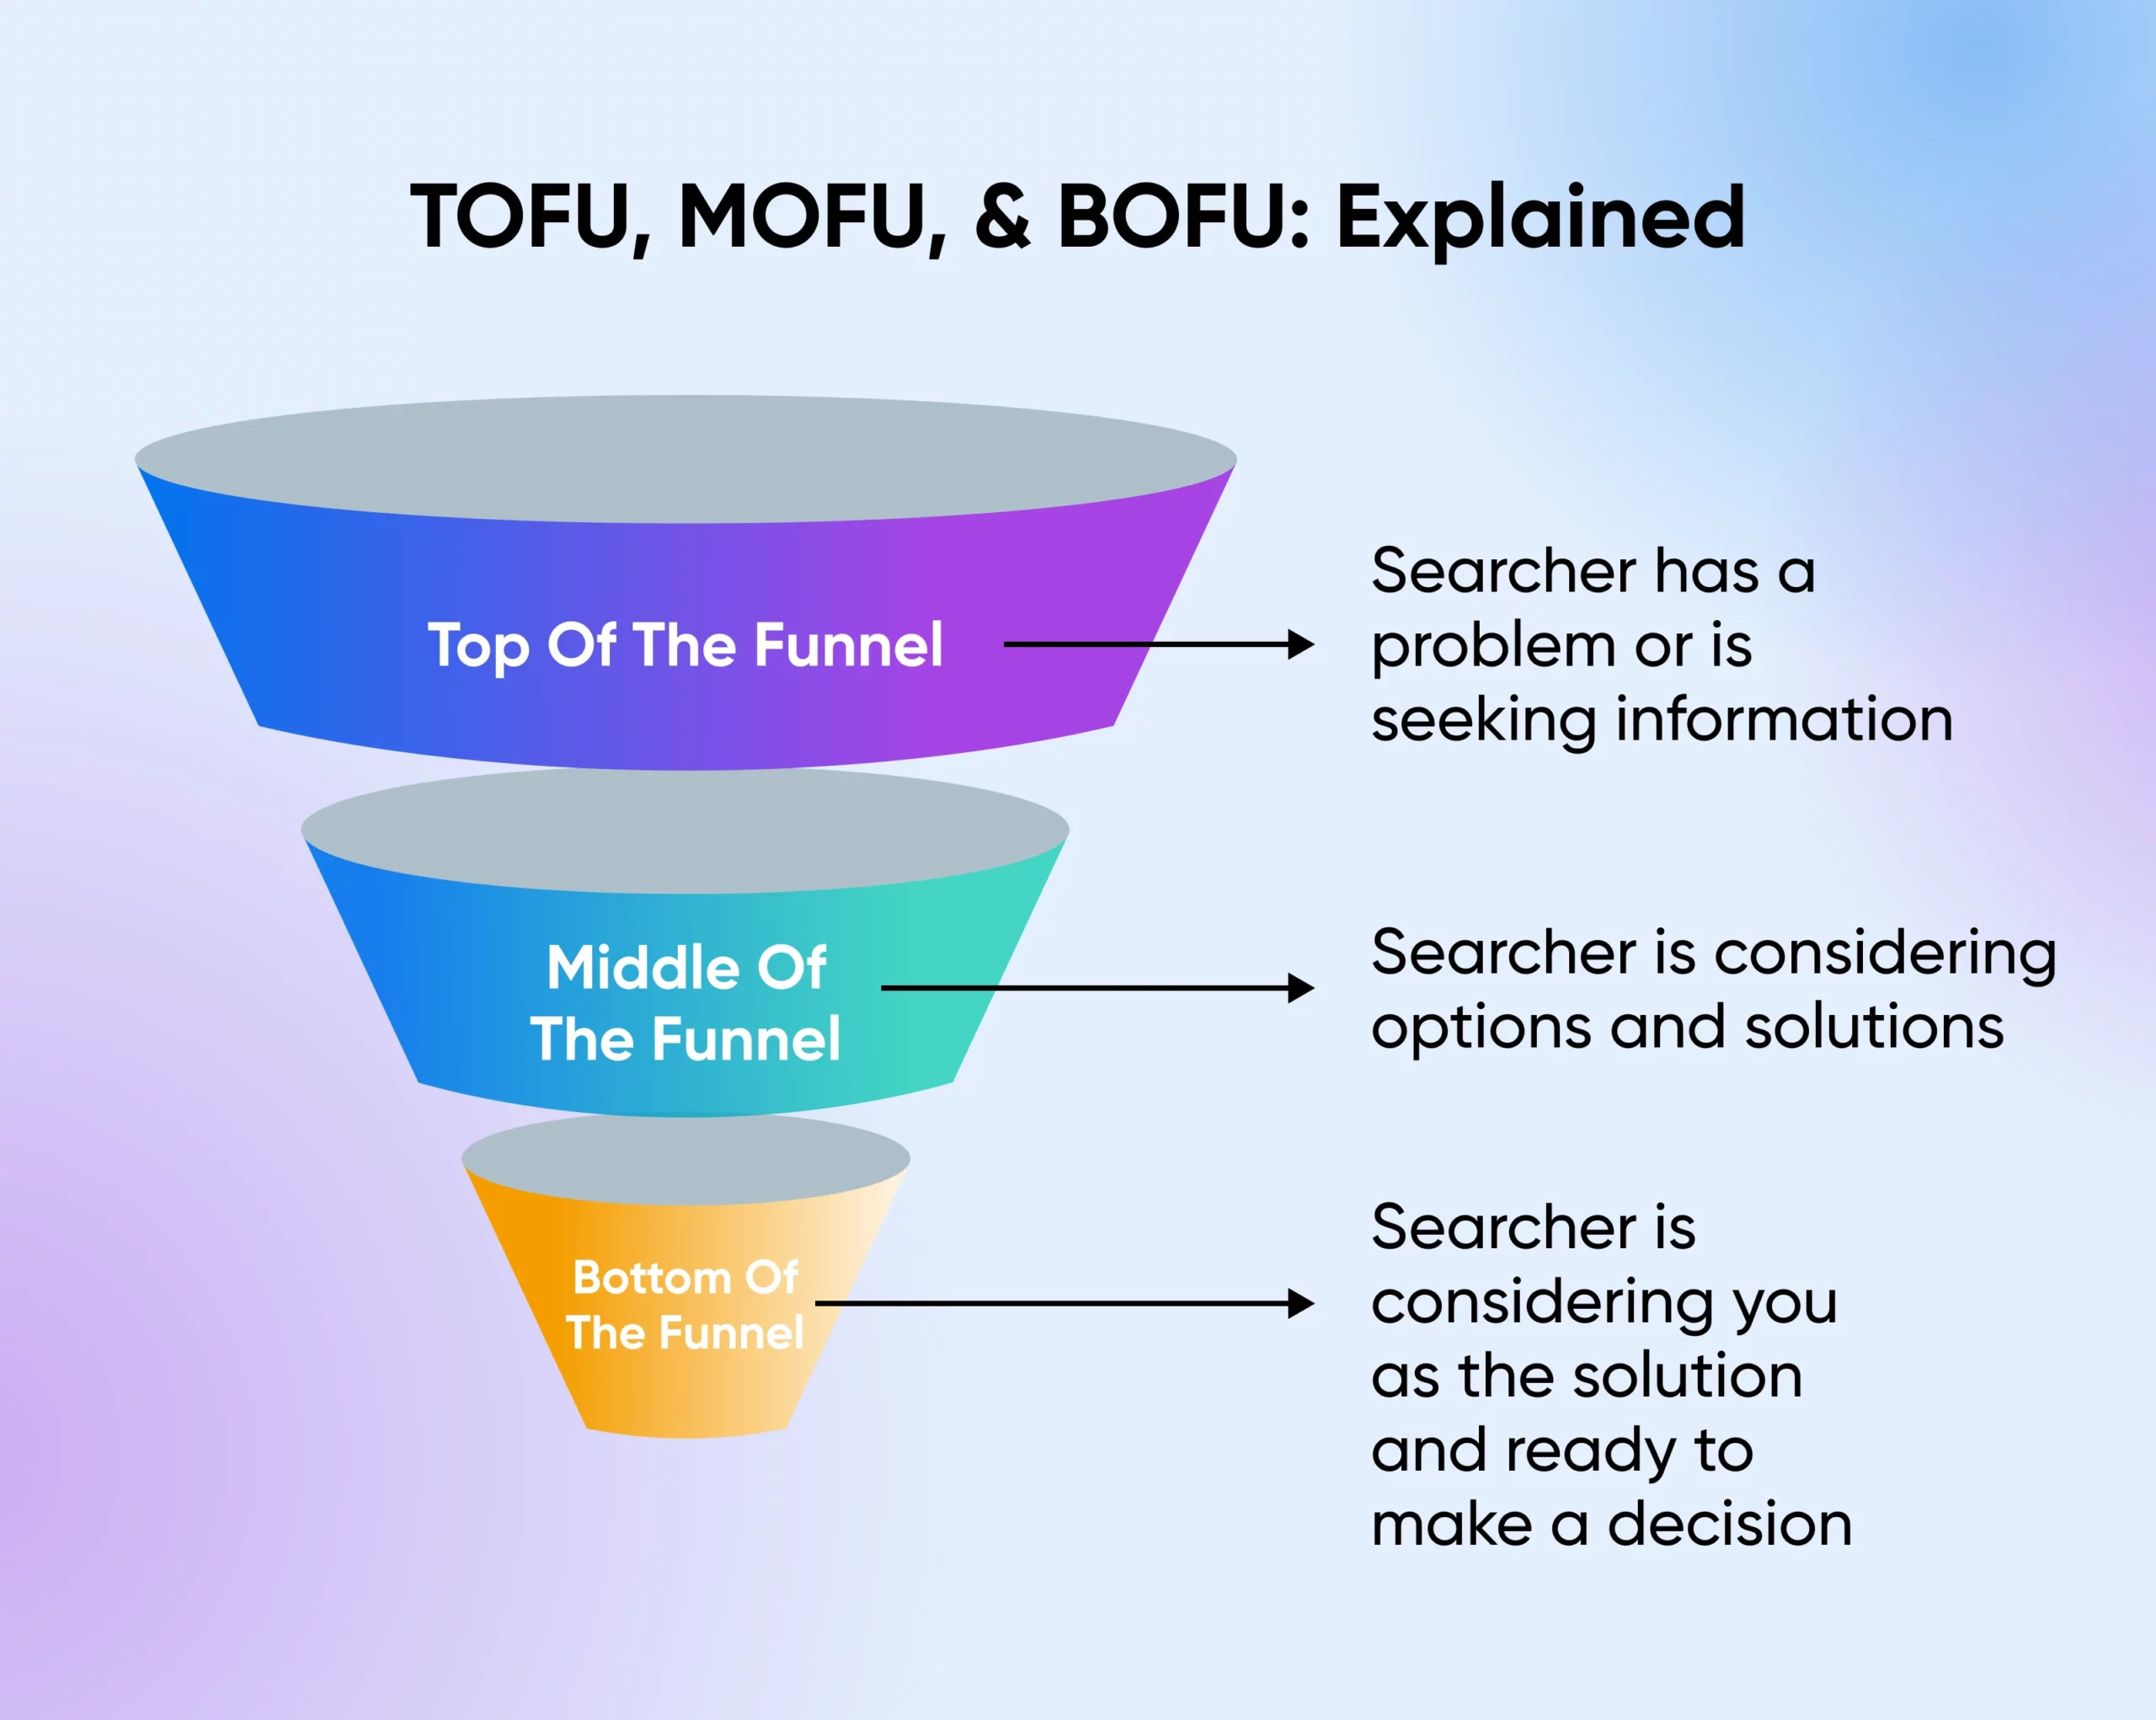 Infographic "TOFU, MOFU, & BOFU: Explained" showing a funnel shape with short descriptions for their functions.